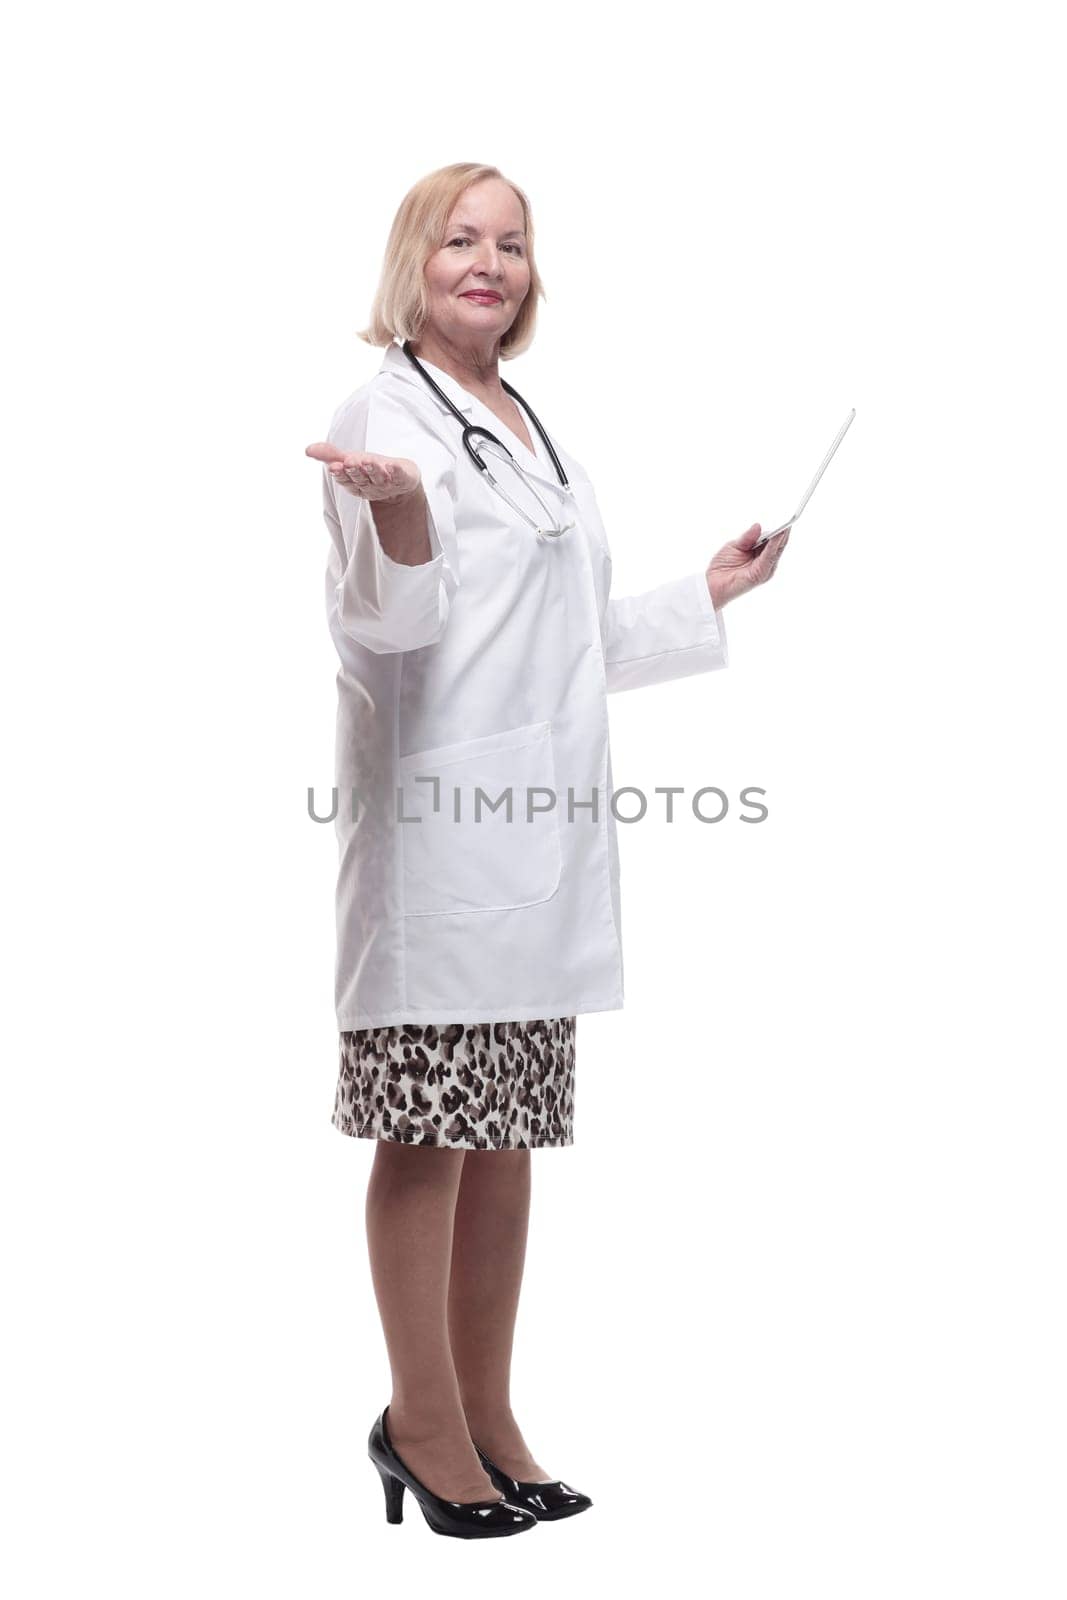 in full growth. medical woman with a digital tablet. isolated on a white background.